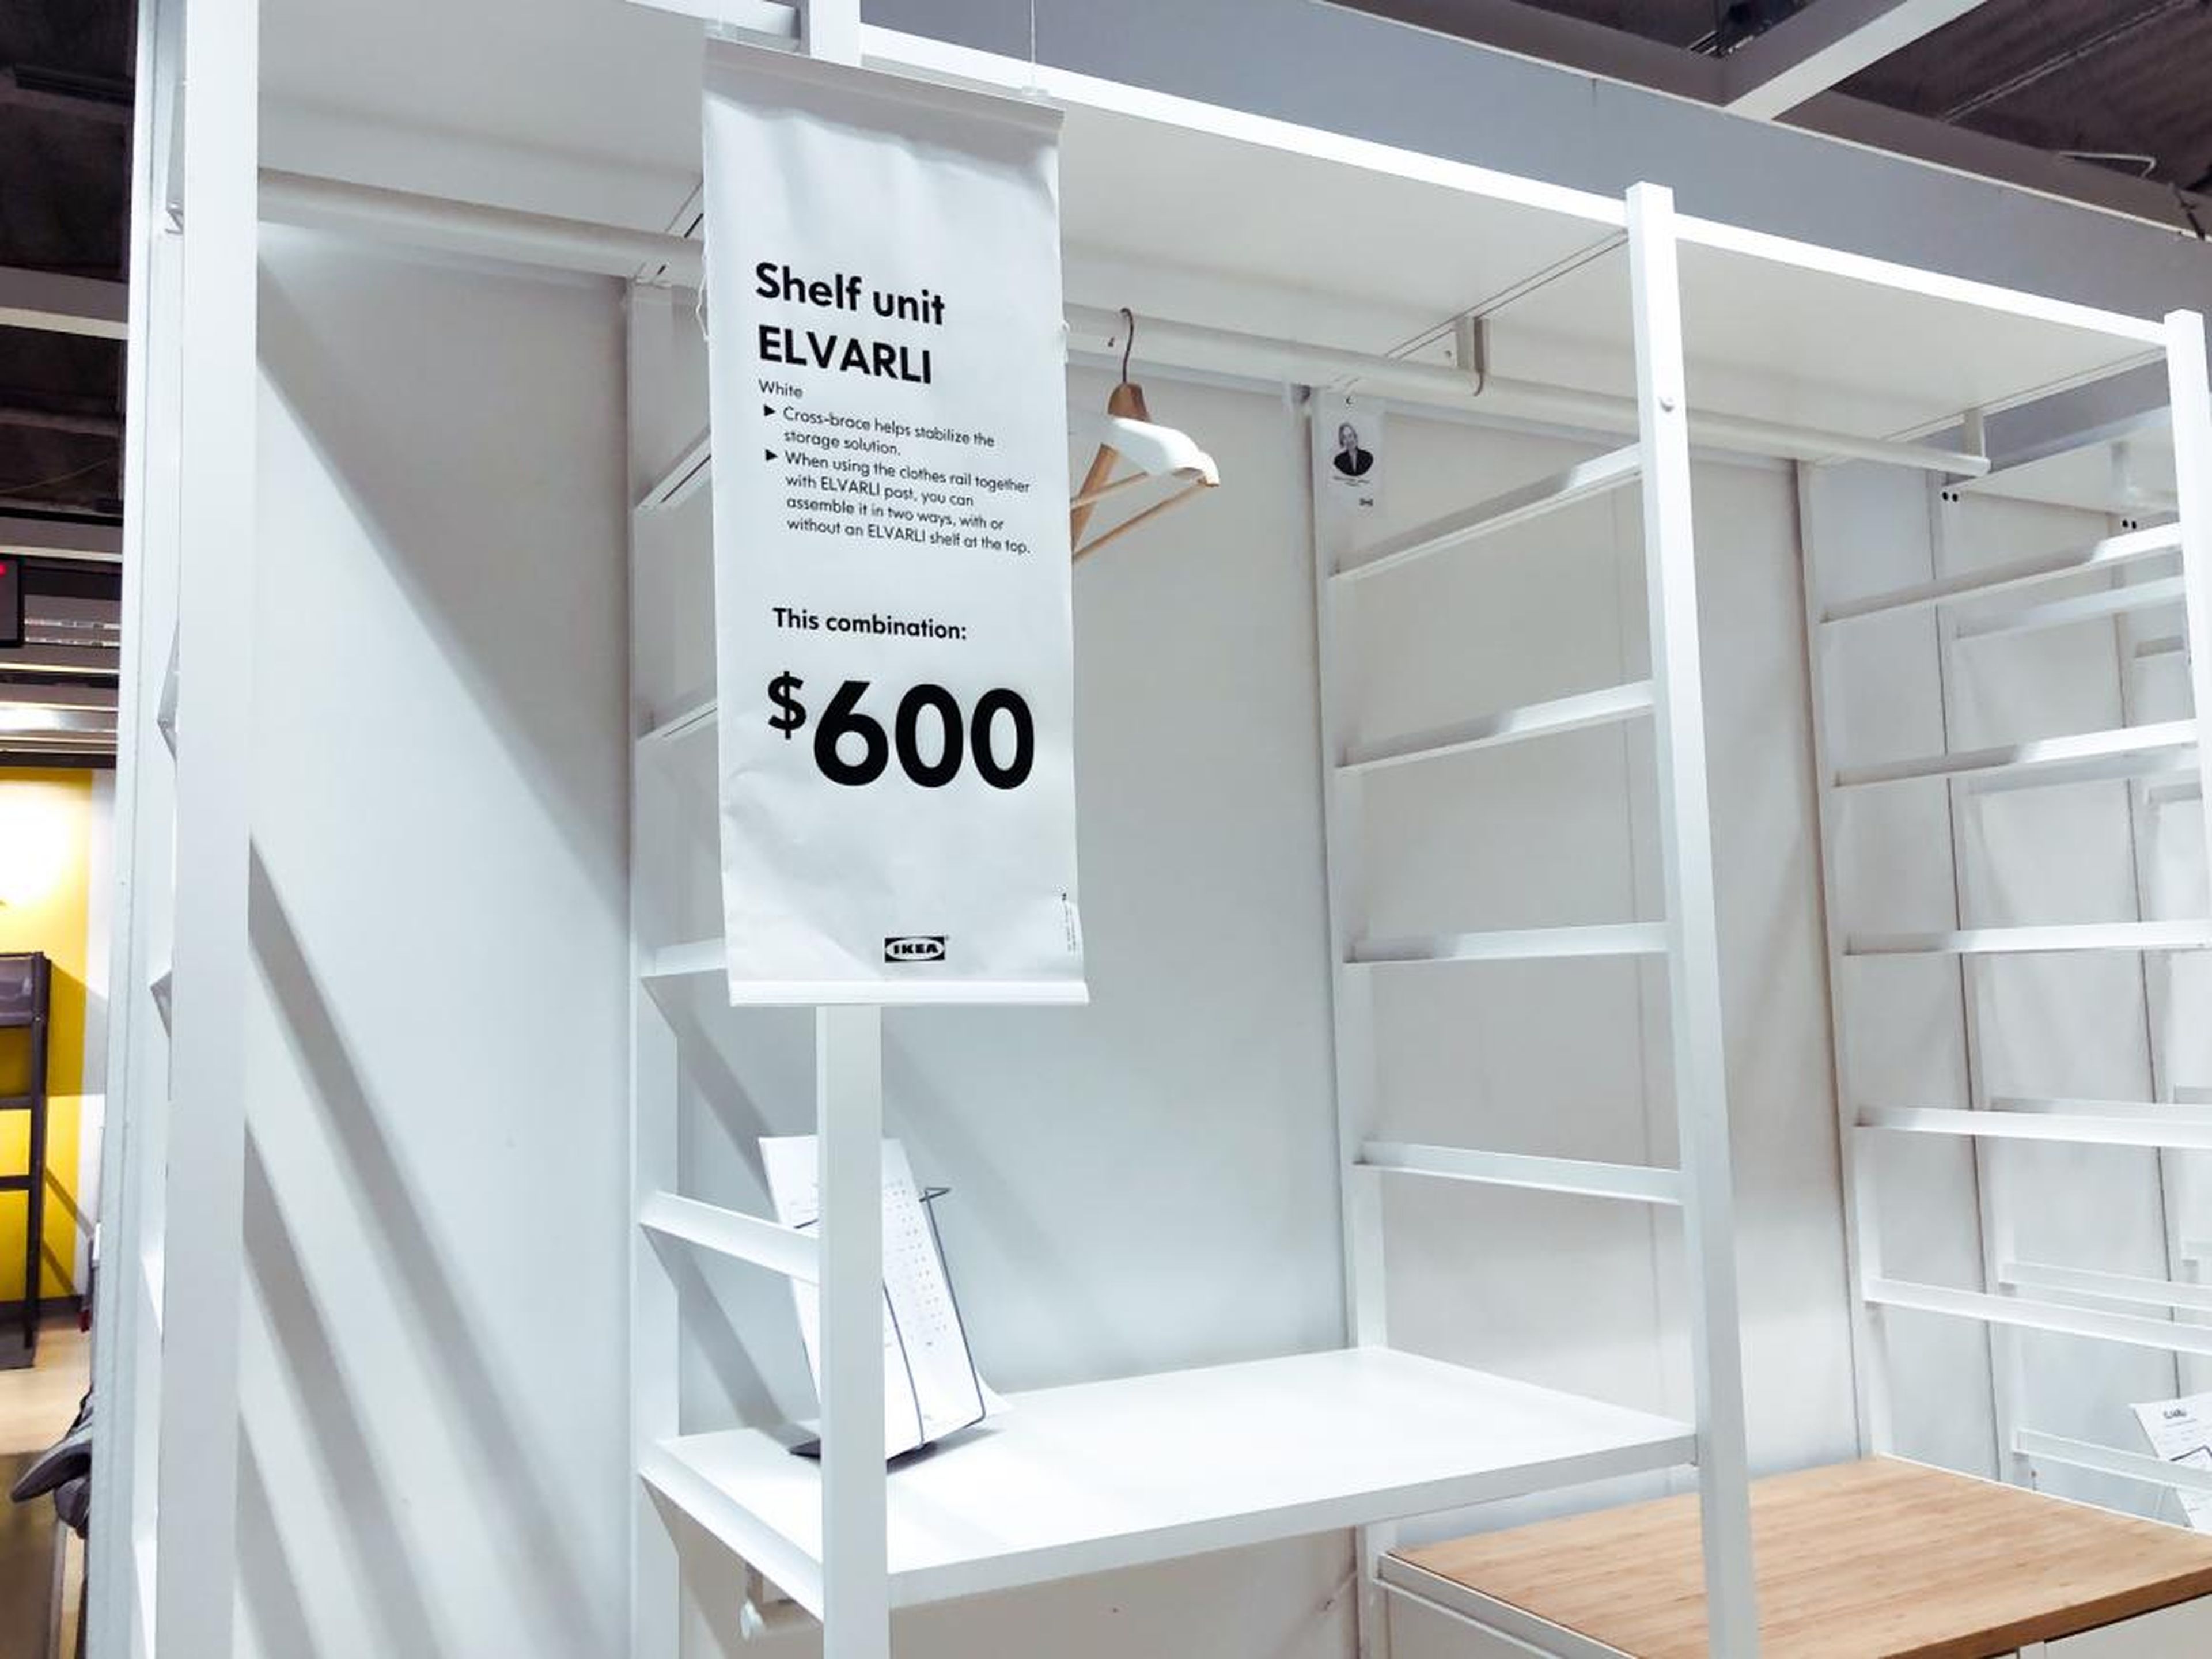 Shelving units can be bought individually or in combination with one another. Combinations could cost as much as $600, but it was hard to tell how sturdy they were.